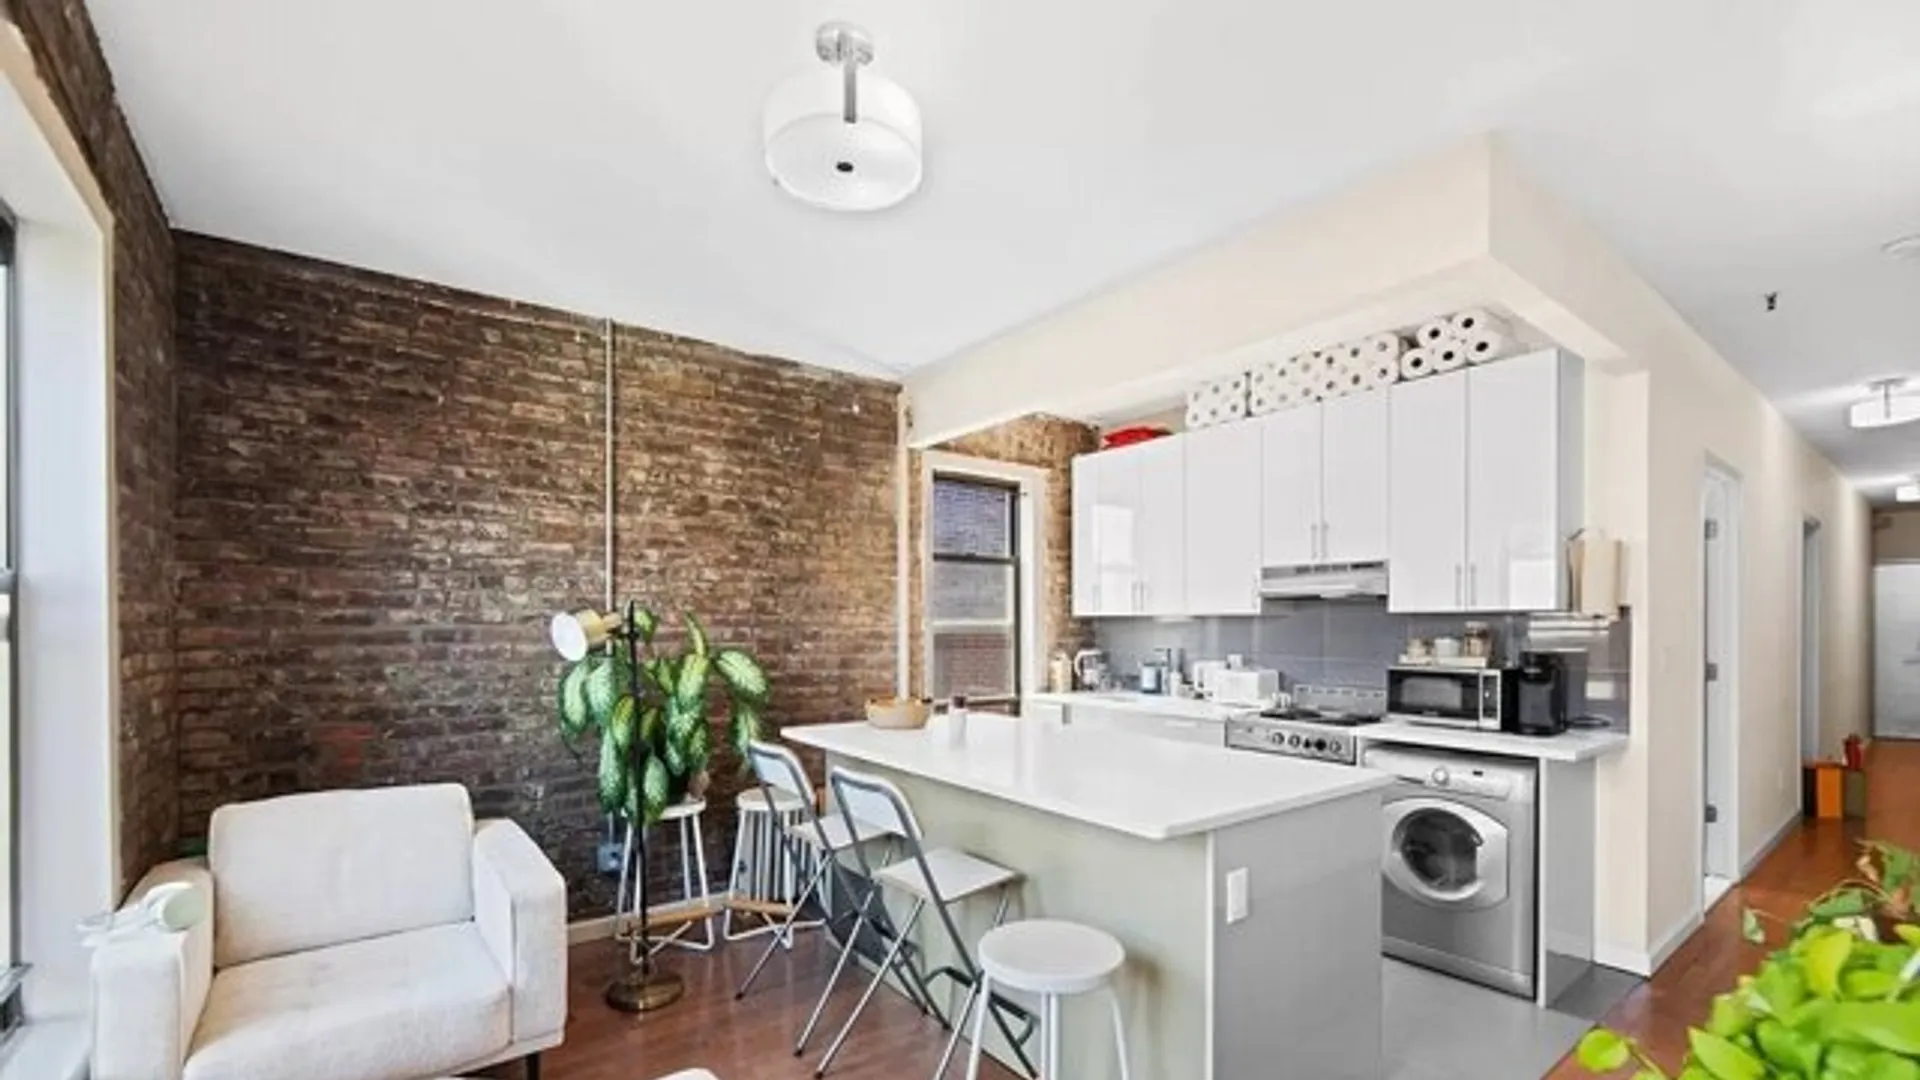 6 Saint Nicholas Terrace, New York, NY 10027, USA | 3 bed apartment for rent